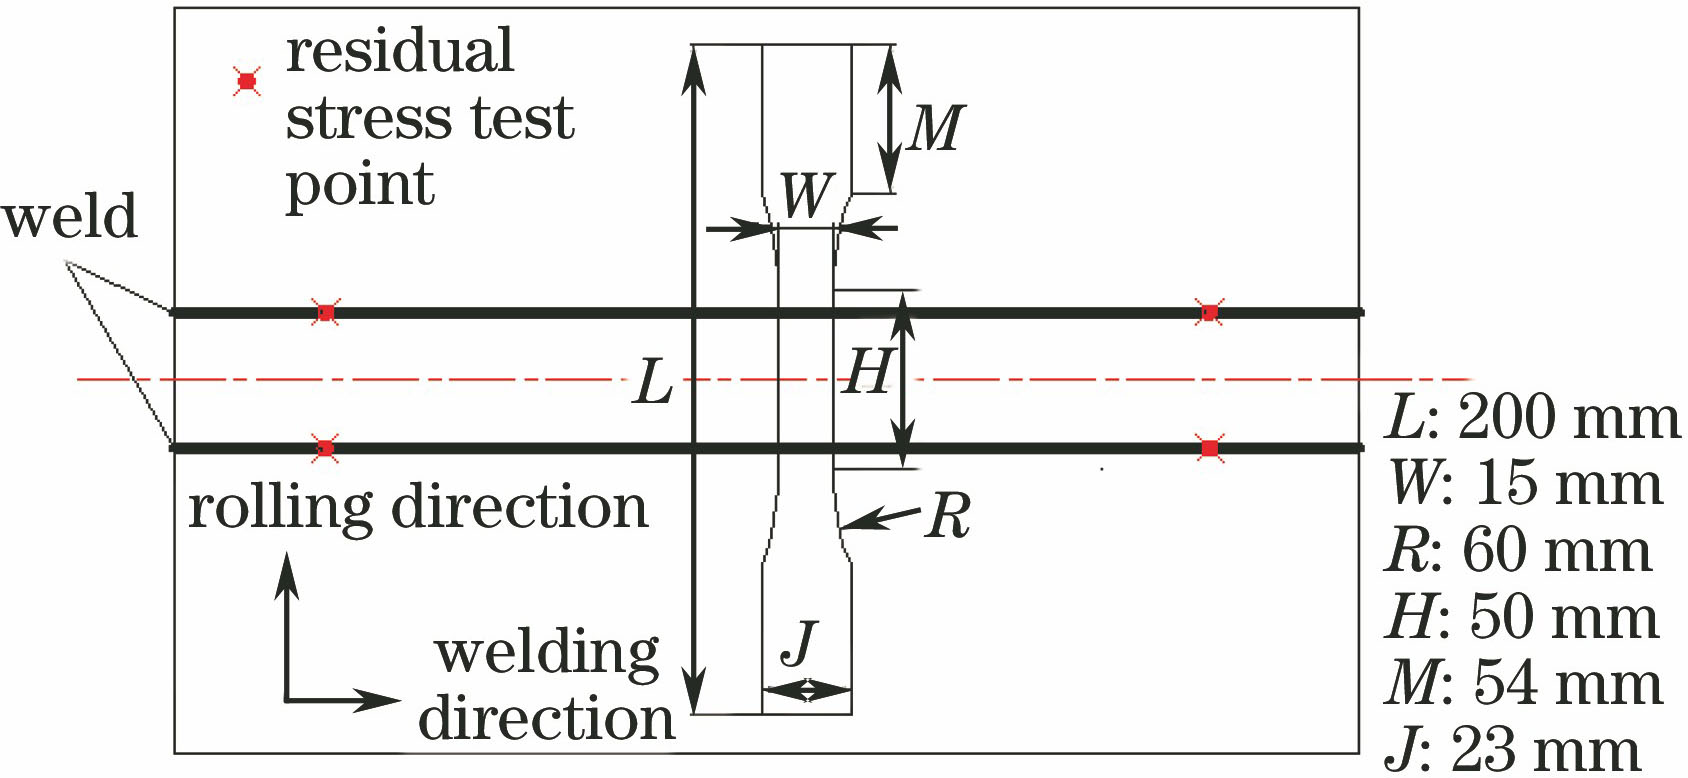 Schematic of residual stress test point and fatigue sample